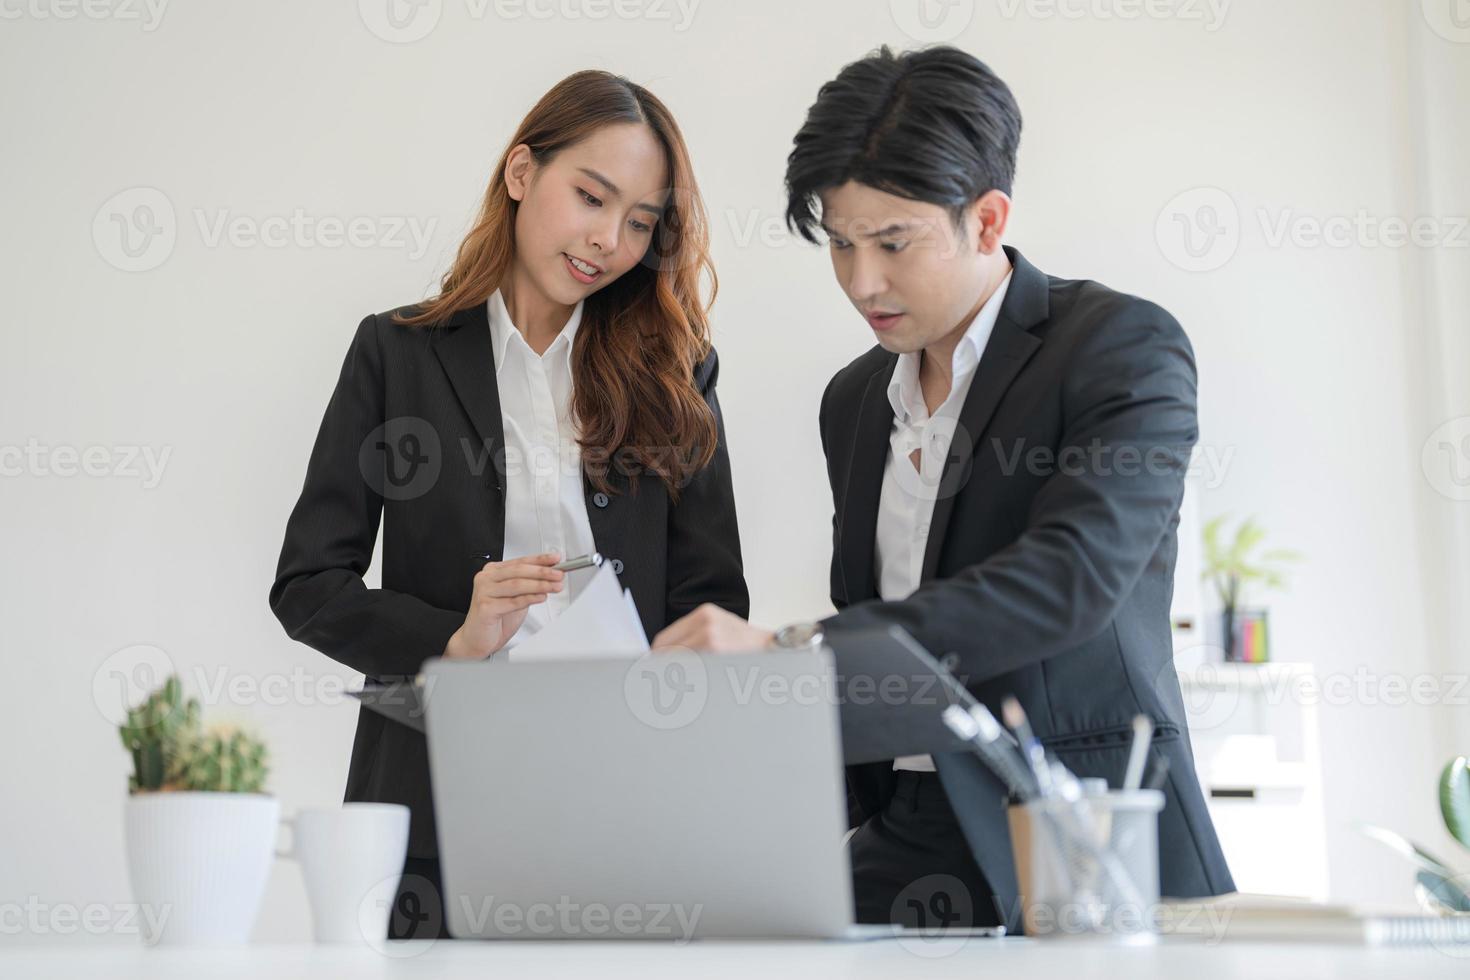 Business people stand together at a desk talking on their laptops photo